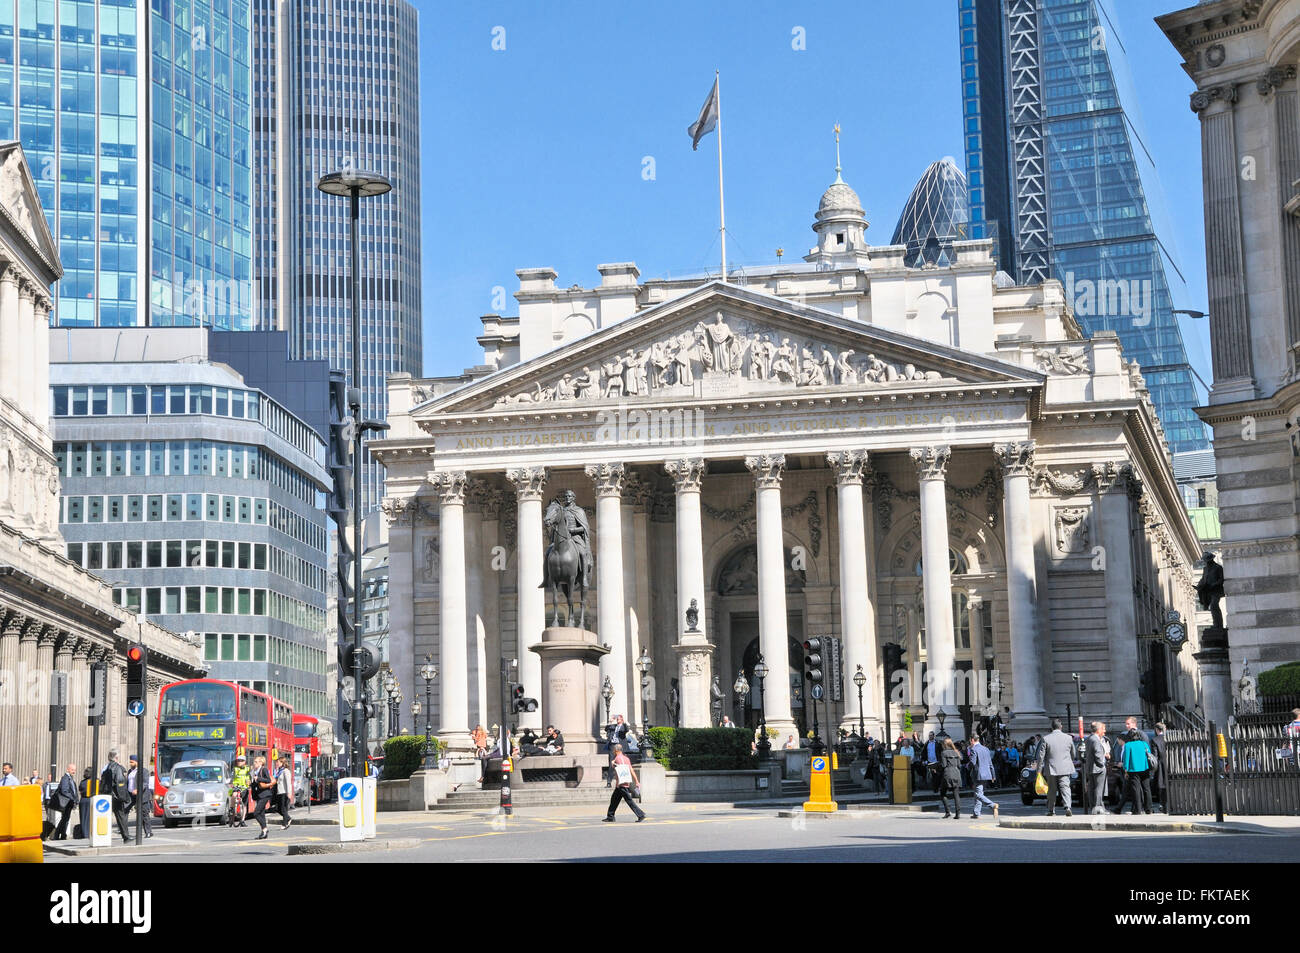 Le Royal Exchange, Threadneedle Street, City of London, UK Banque D'Images